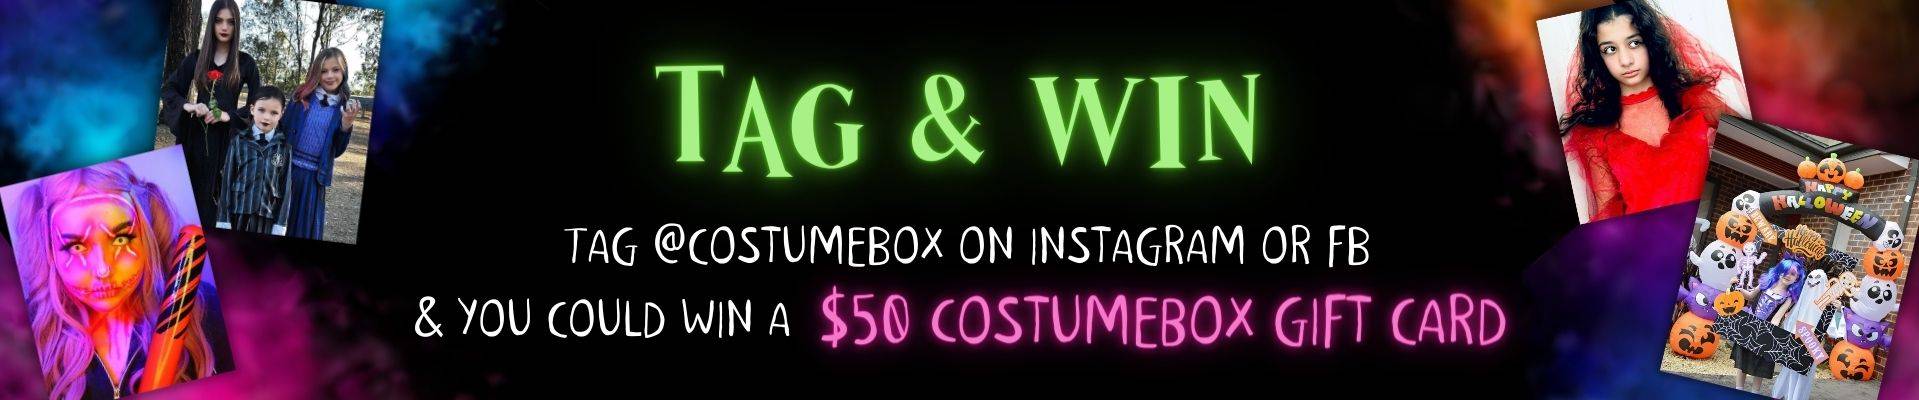 Tag @costumebox on Instagram or Facebook and win $50 CostumeBox gift voucher. 